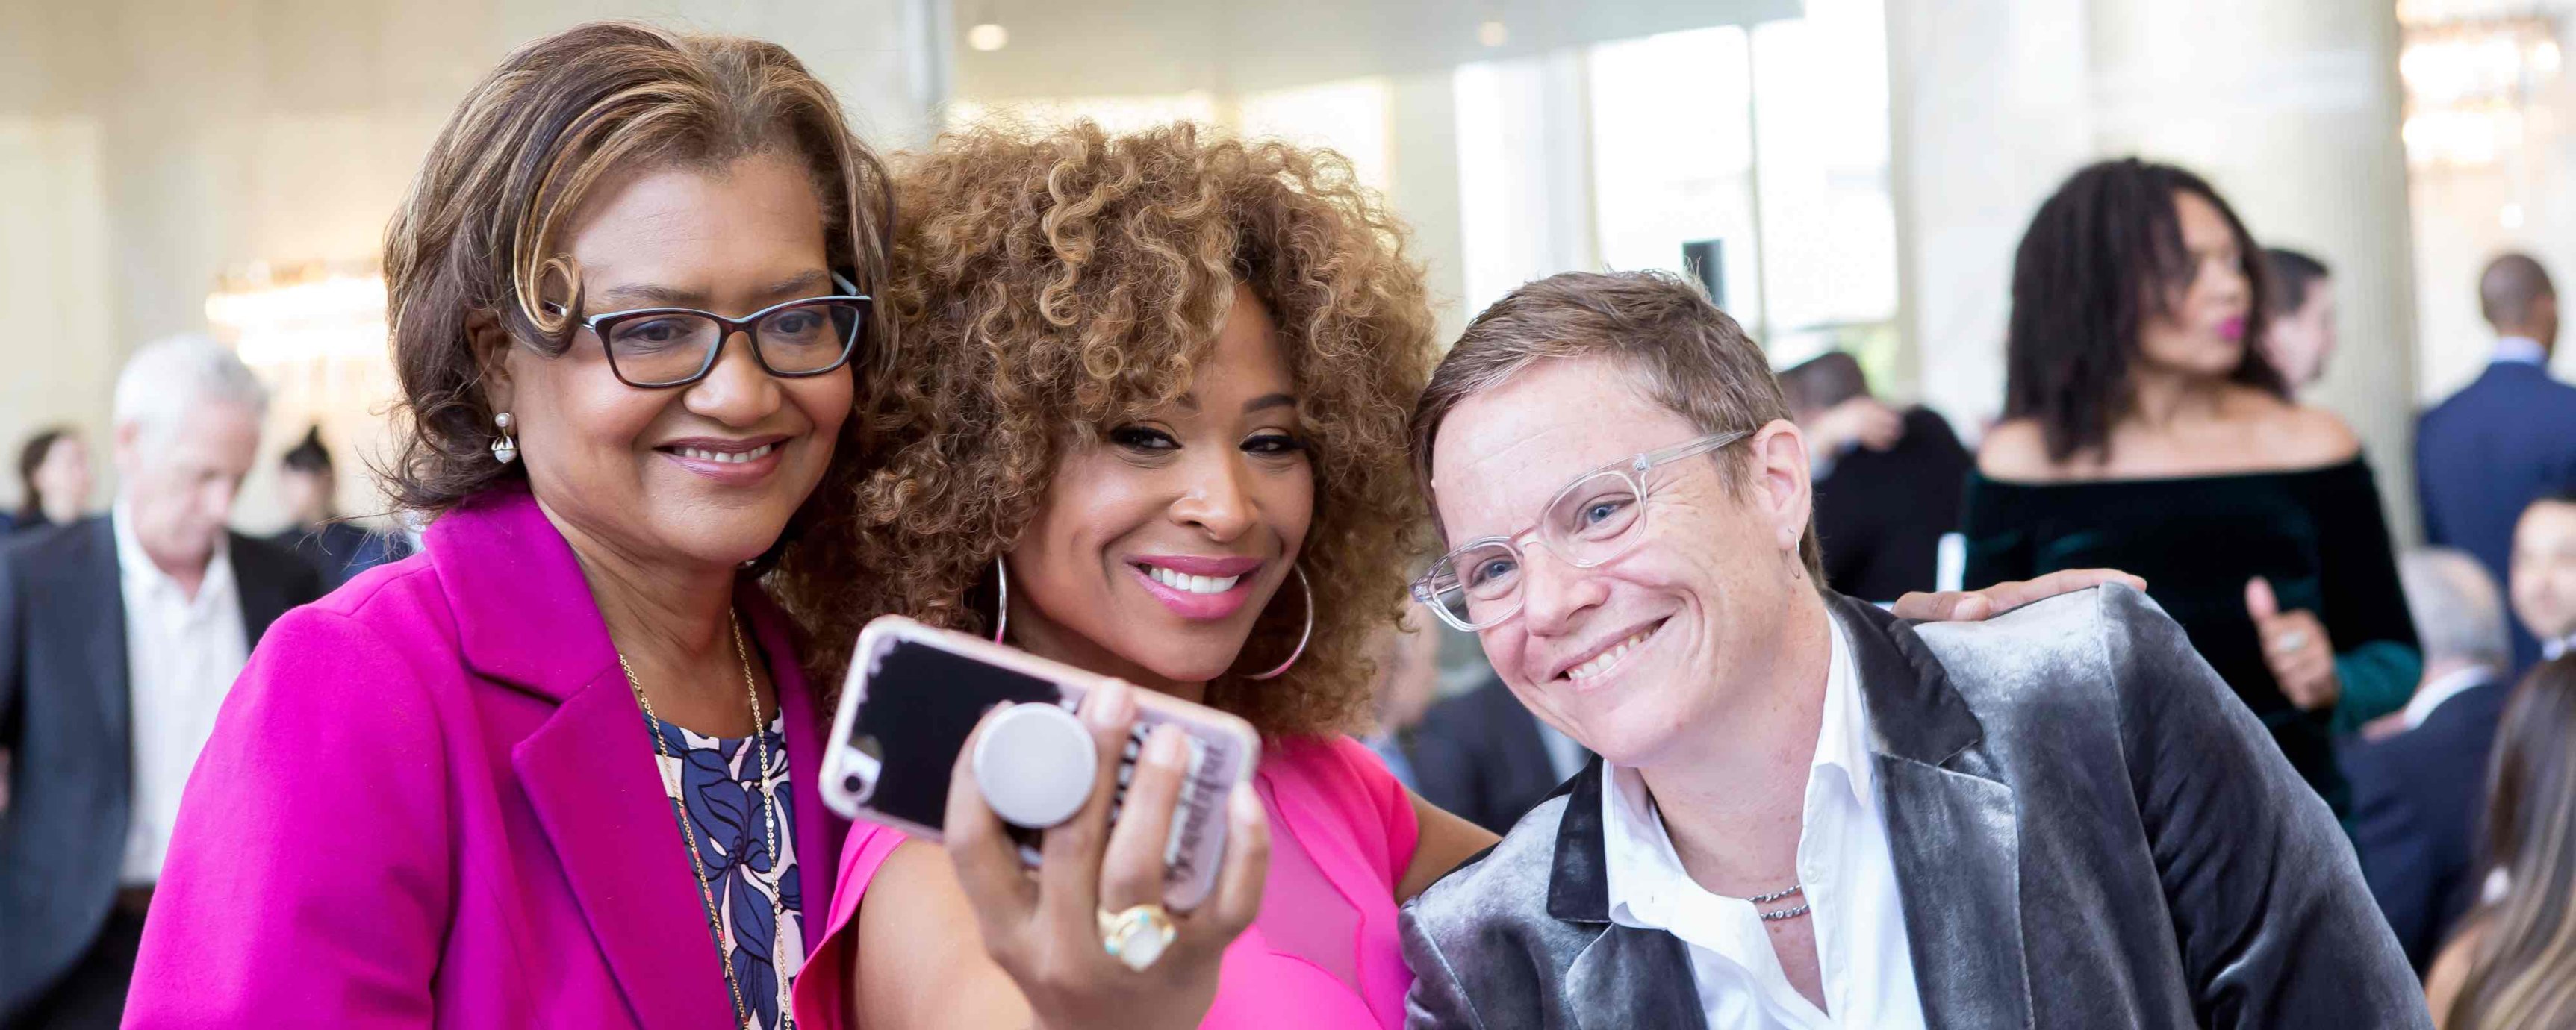 Dr. Batchlor, a middle-aged Black woman, Tanika Ray, a young Black woman, and Chris Nee, a middle-aged white woman, taking a selfie together